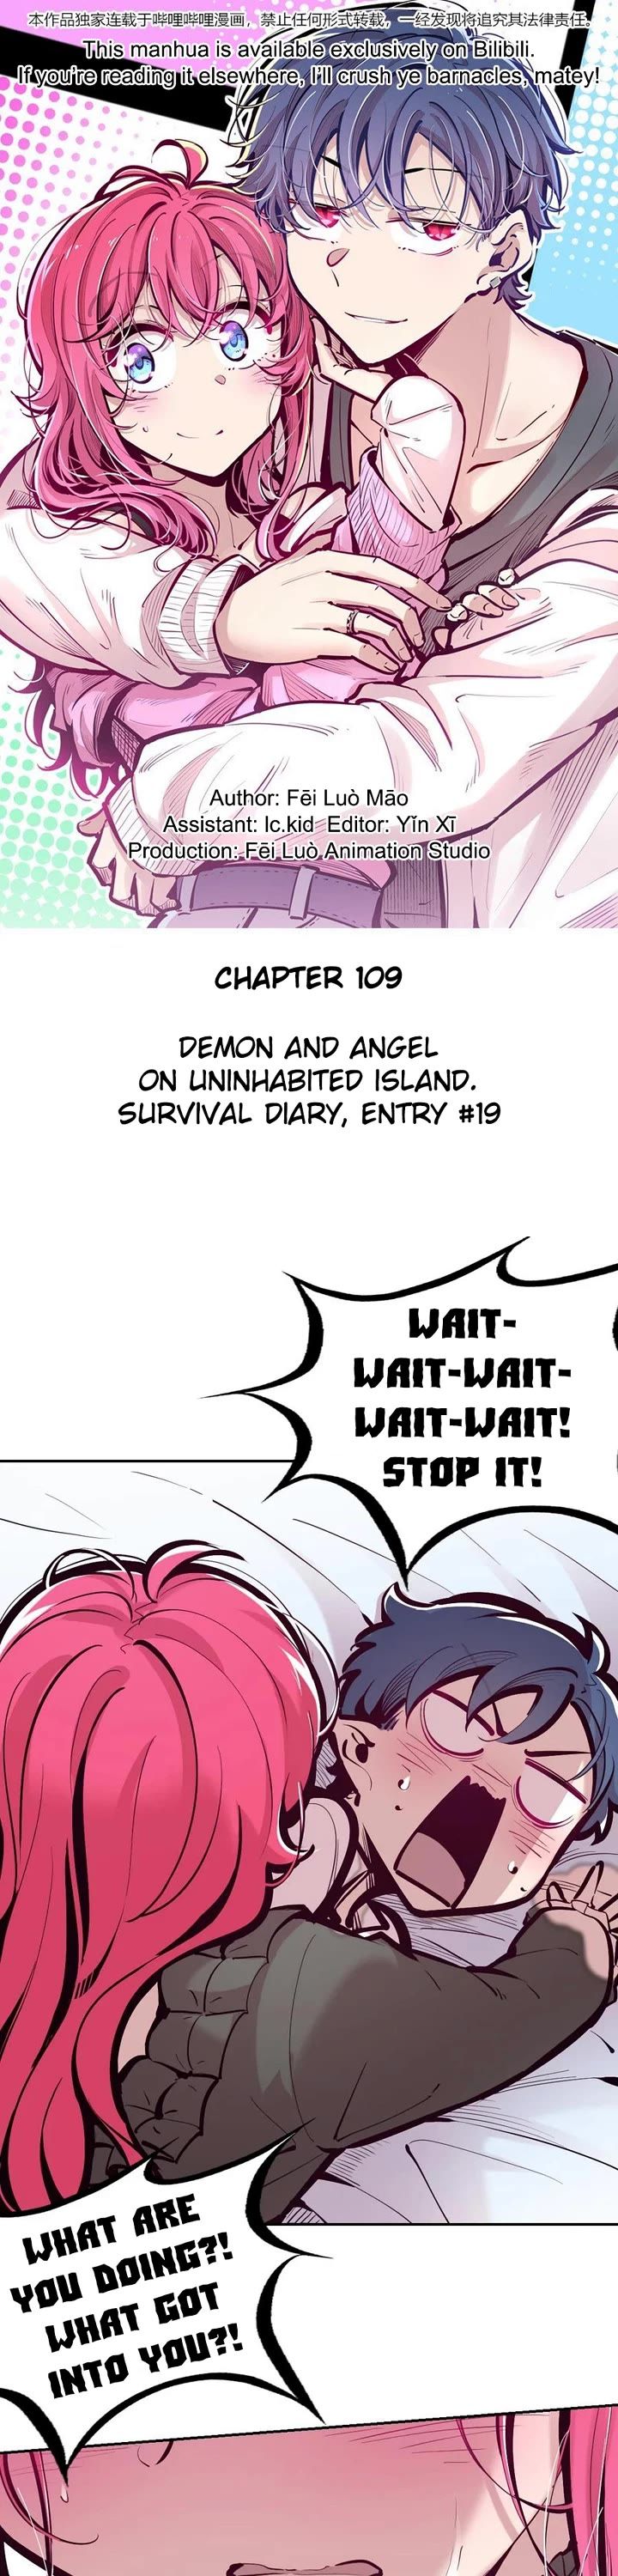 Demon X Angel, Can’T Get Along! Chapter 109 page 1